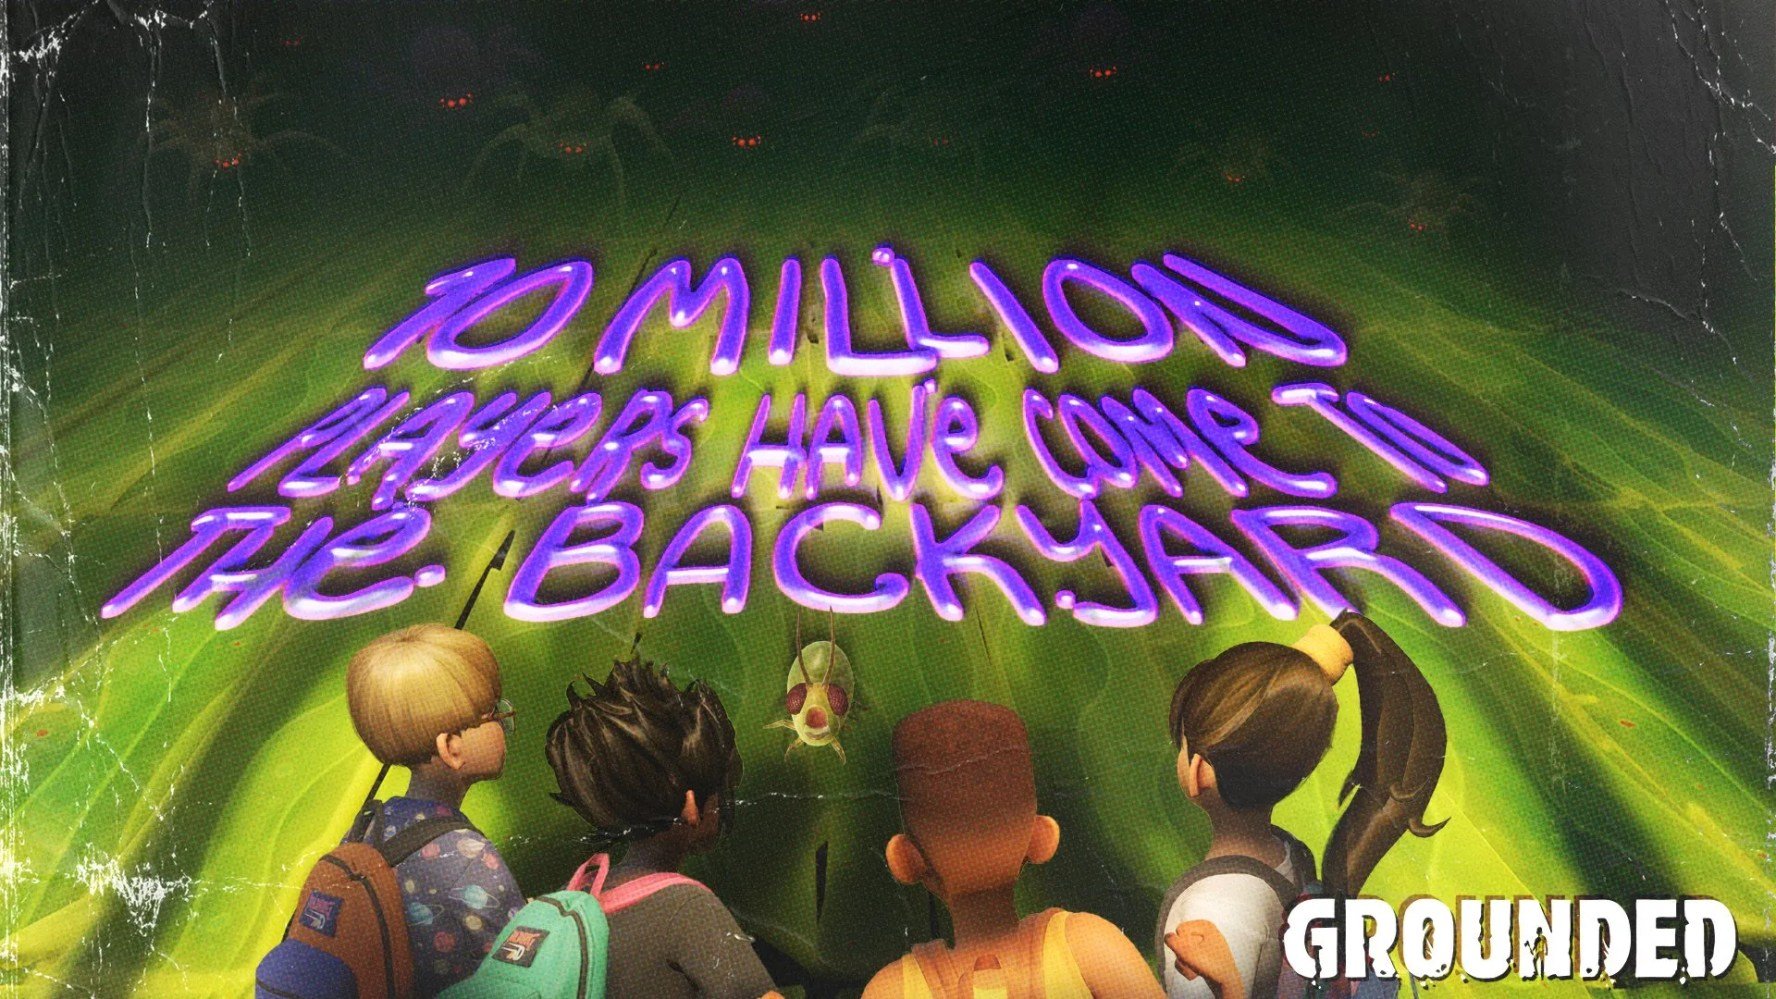 Grounded 10 Million Players Announcement Image